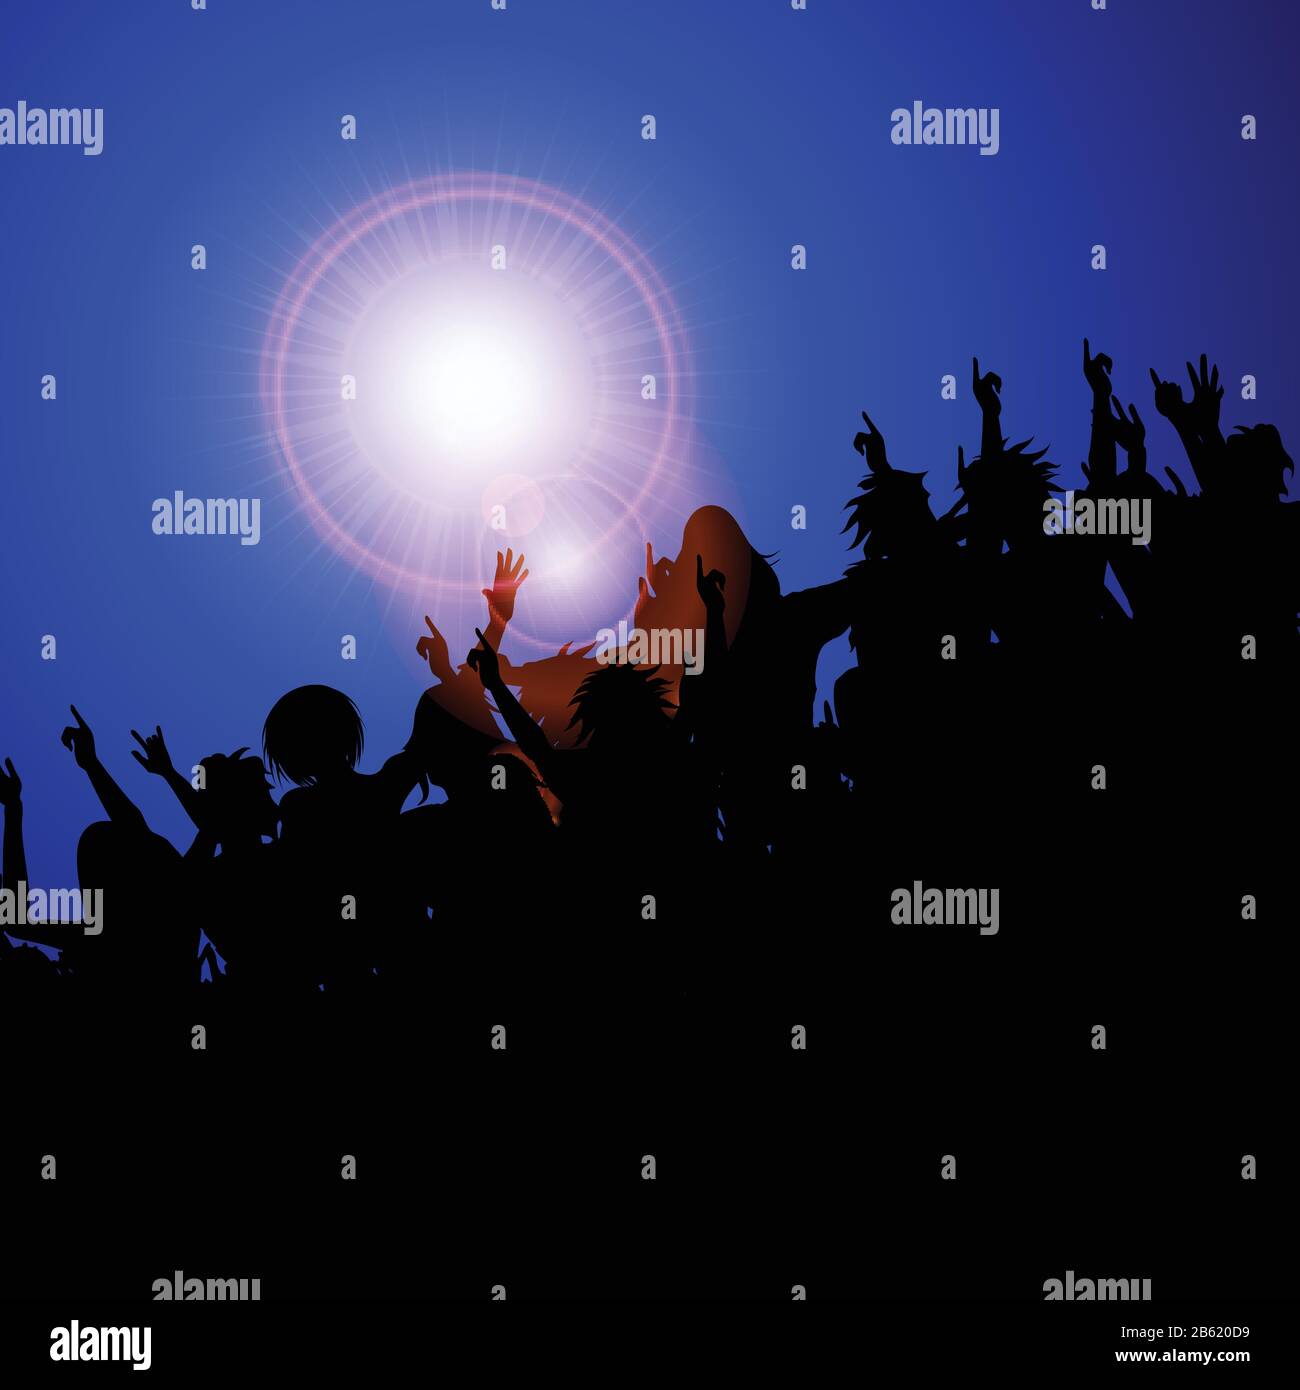 Festival Party Concert Crowd Black Silhouette With Lens Flares Over Dark Blue Background Stock Vector